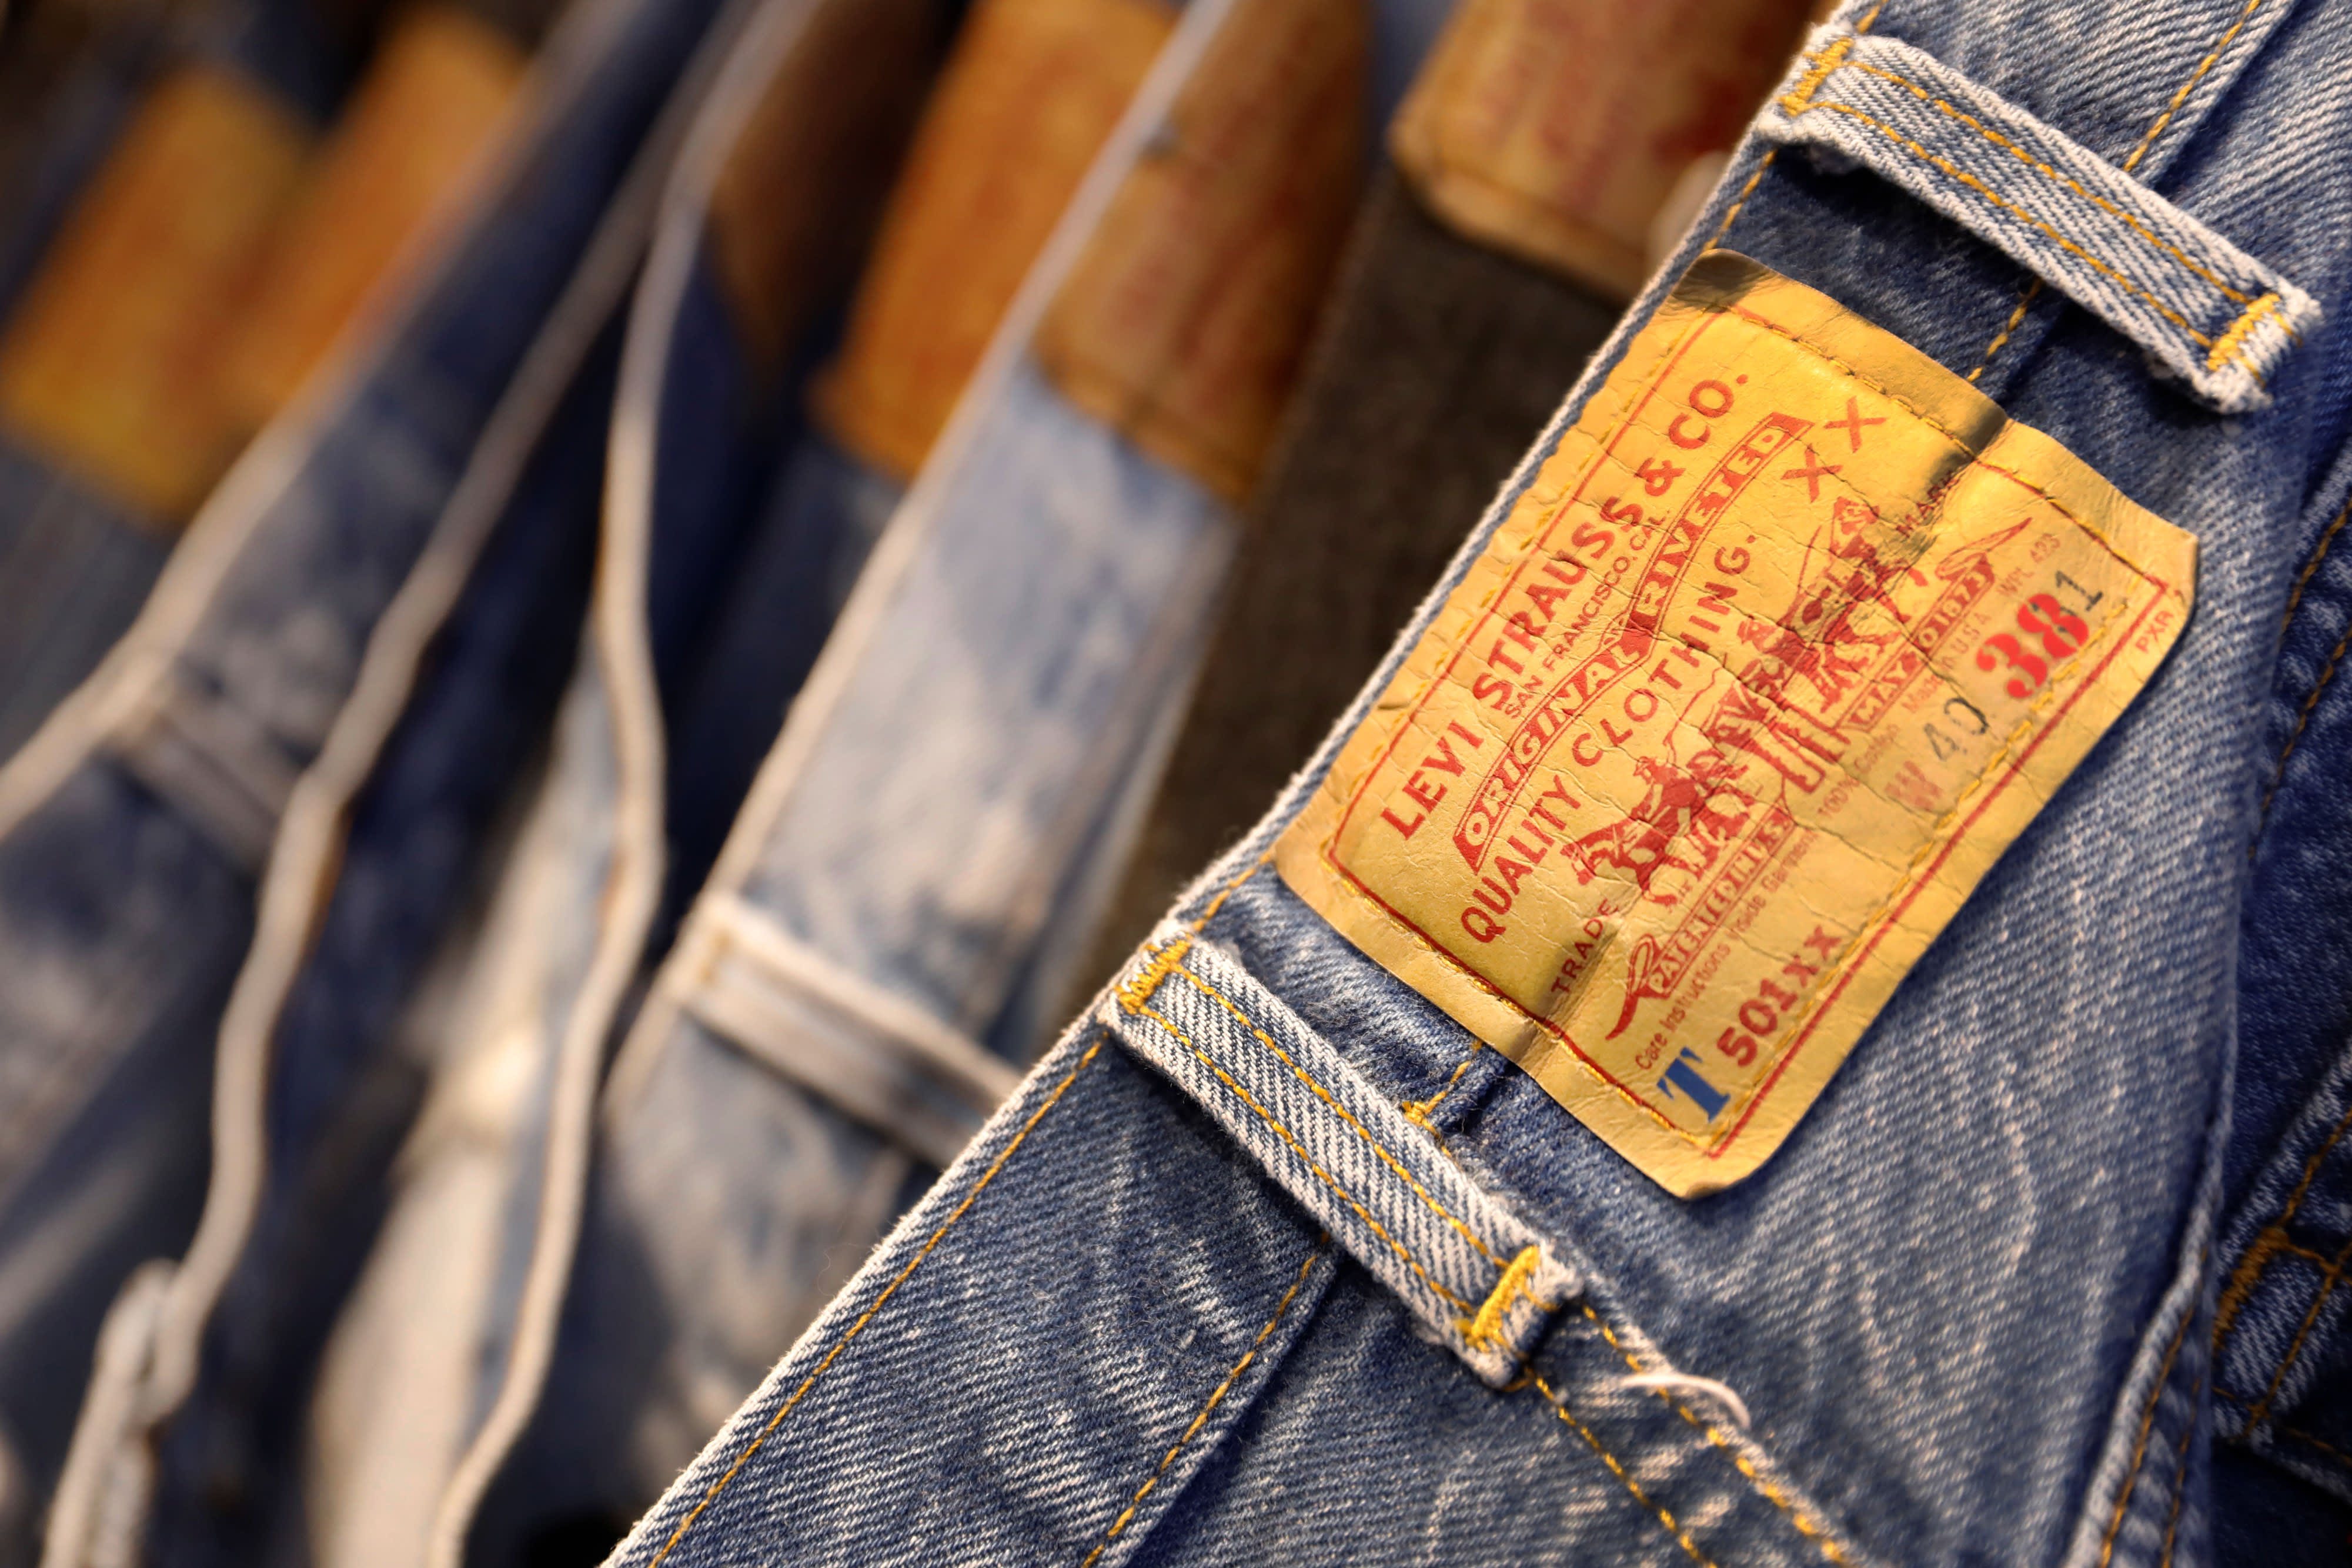 Levi Strauss earnings beat as new denim styles drive sales growth, retailer raises outlook